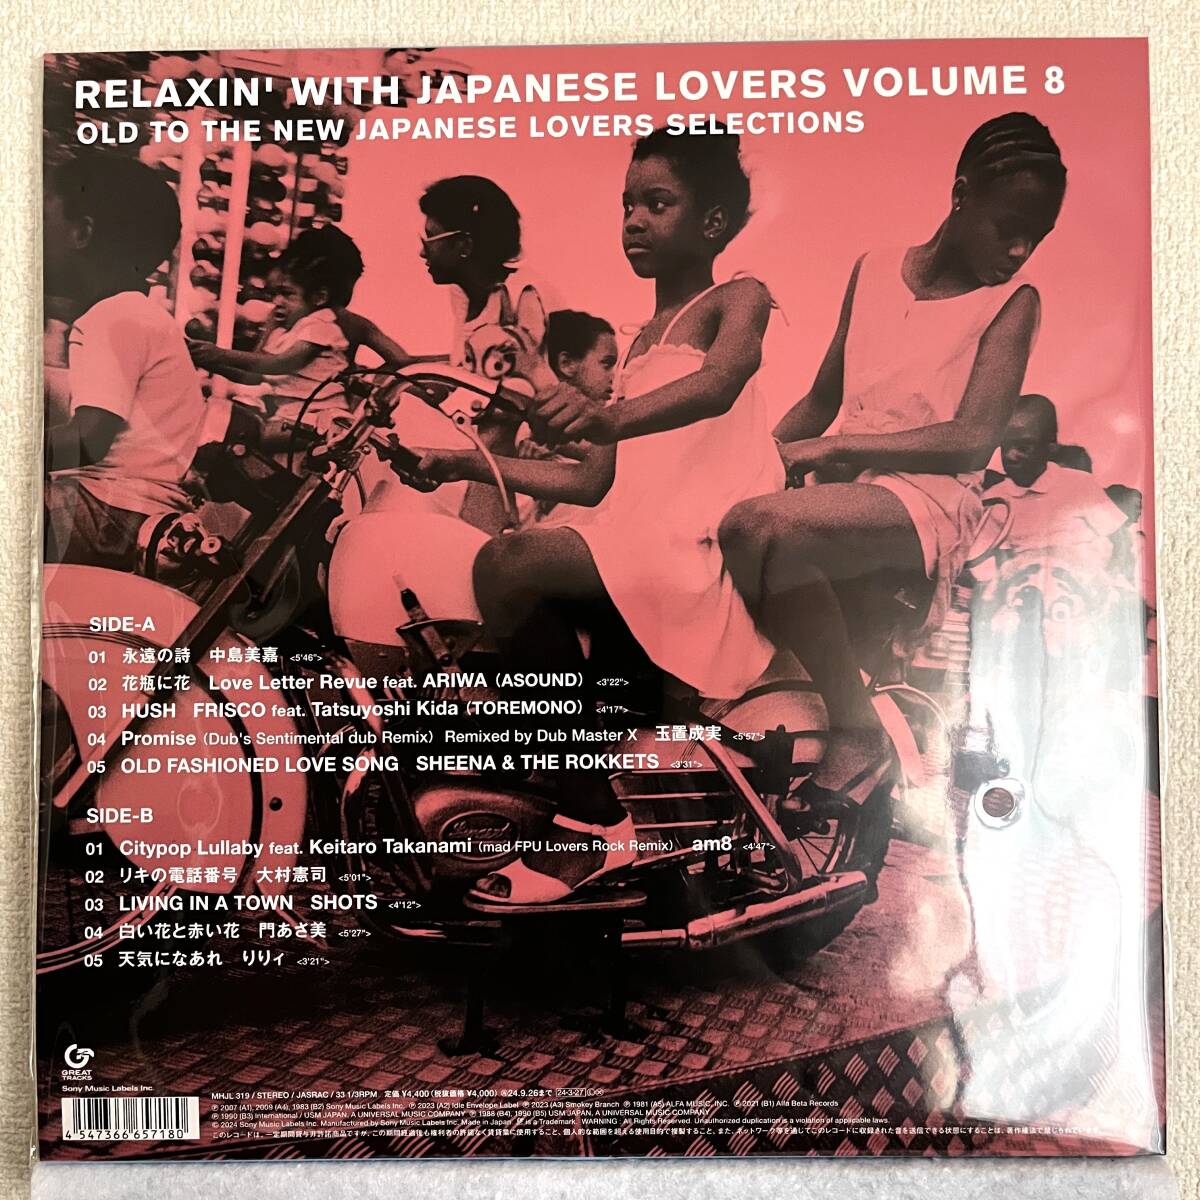 V.A. - RELAXIN' WITH JAPANESE LOVERS VOLUME 8 LP / レコード / アナログ / vinylの画像2